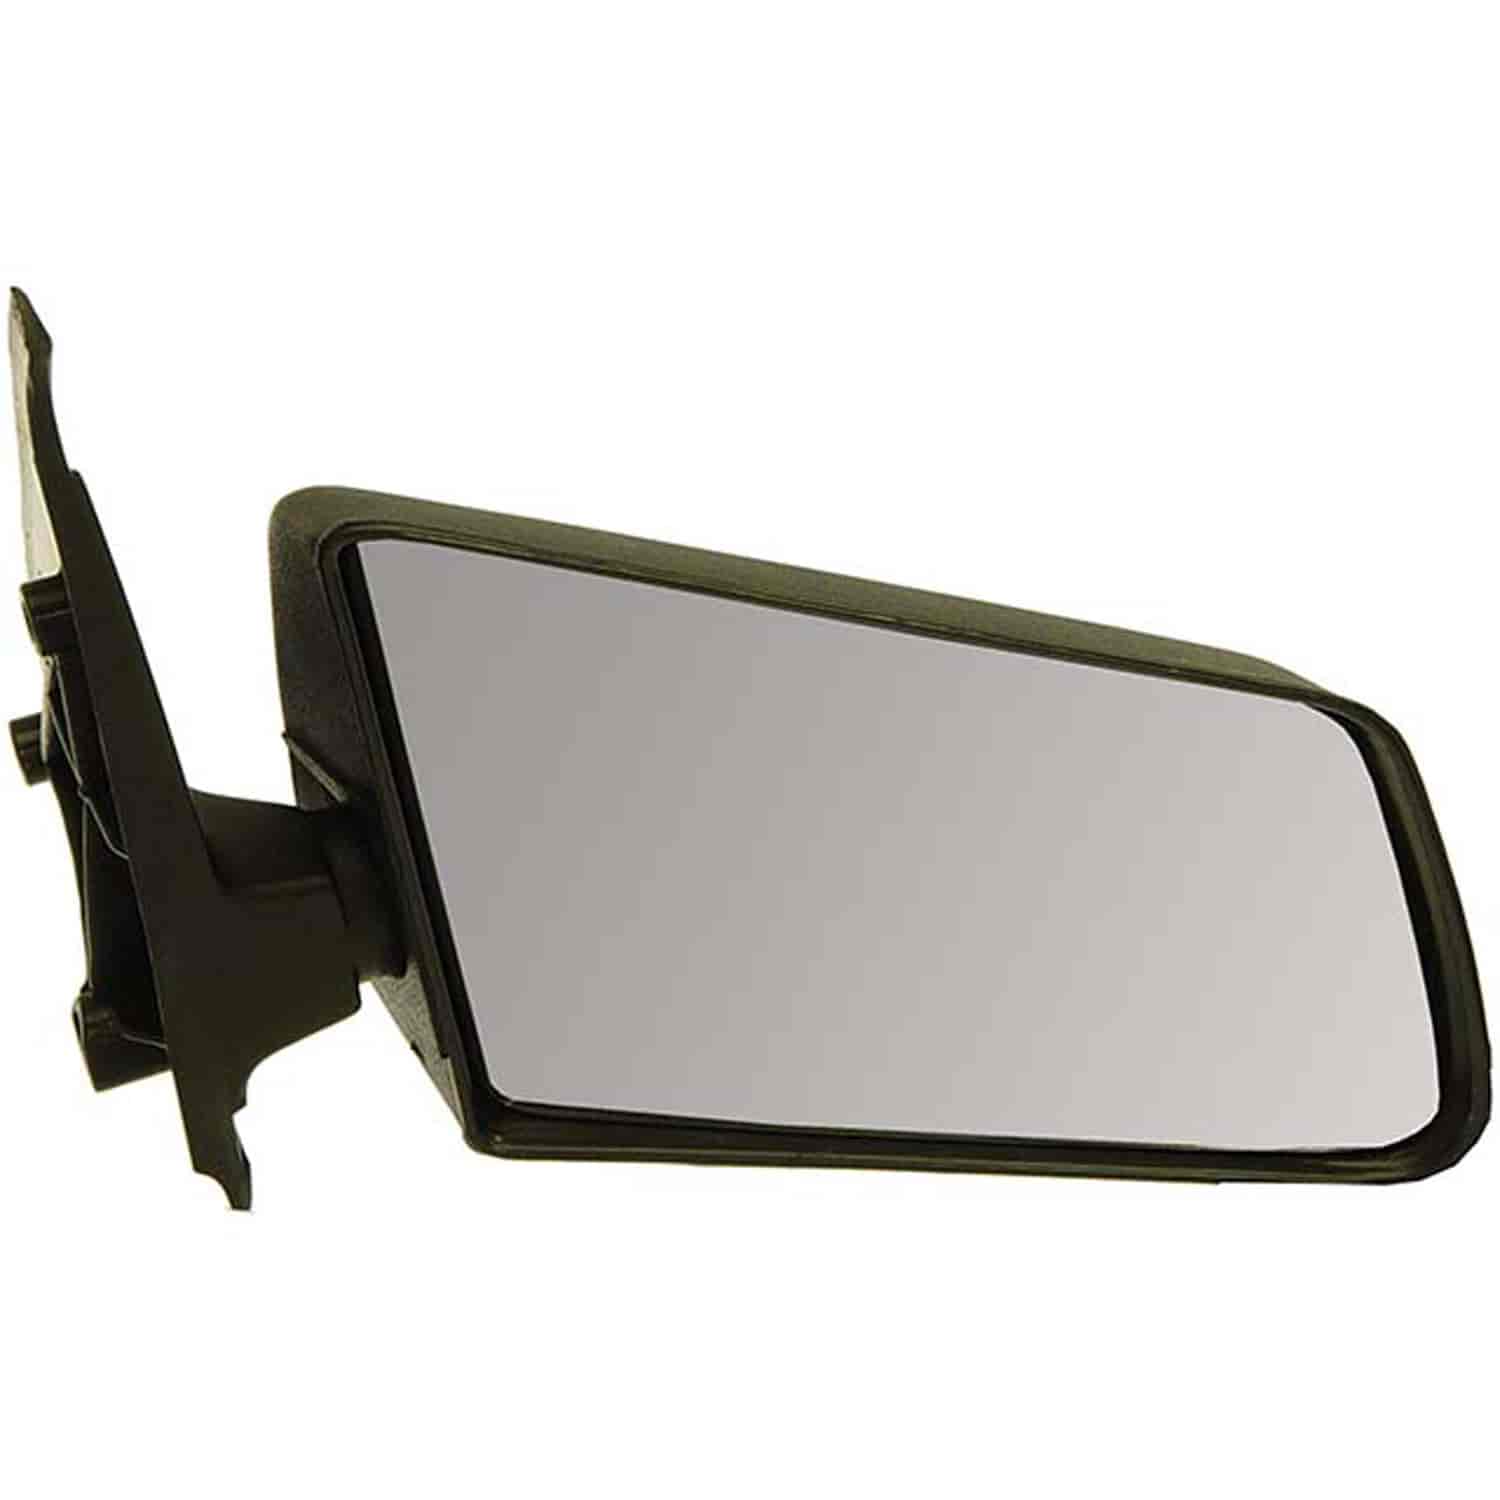 Manual Side View Mirror 1982-1993 Chevy S10 Blazer/GMC S15 Jimmy Right